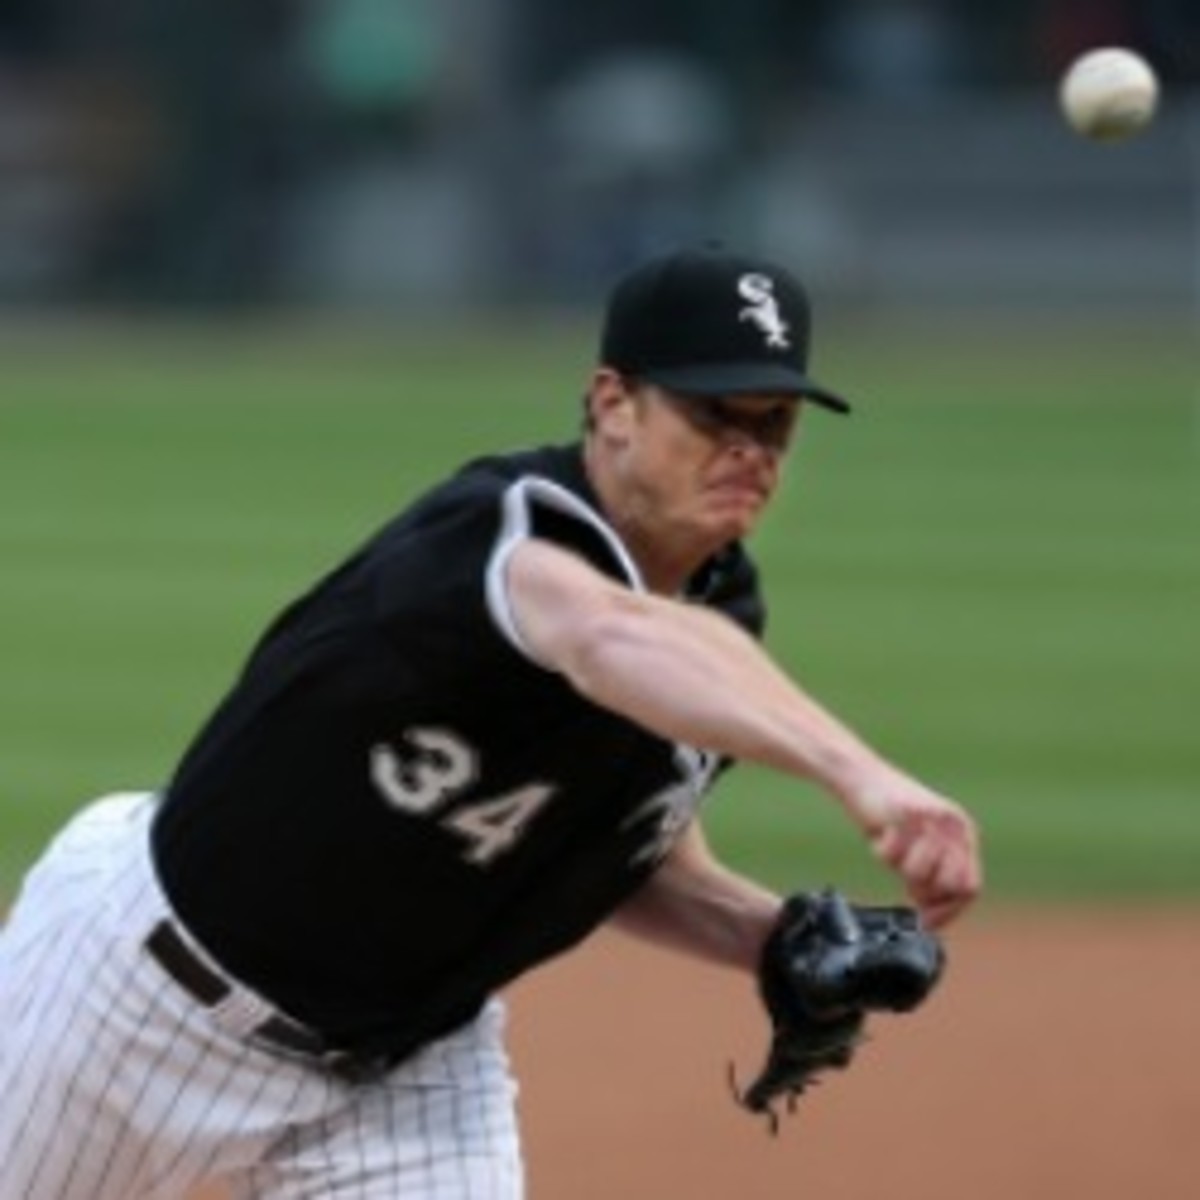 White Sox pitcher Gavin Floyd will miss at least 14 months due to Tommy John surgery. (Photo courtesy of the Chicago Tribune.)